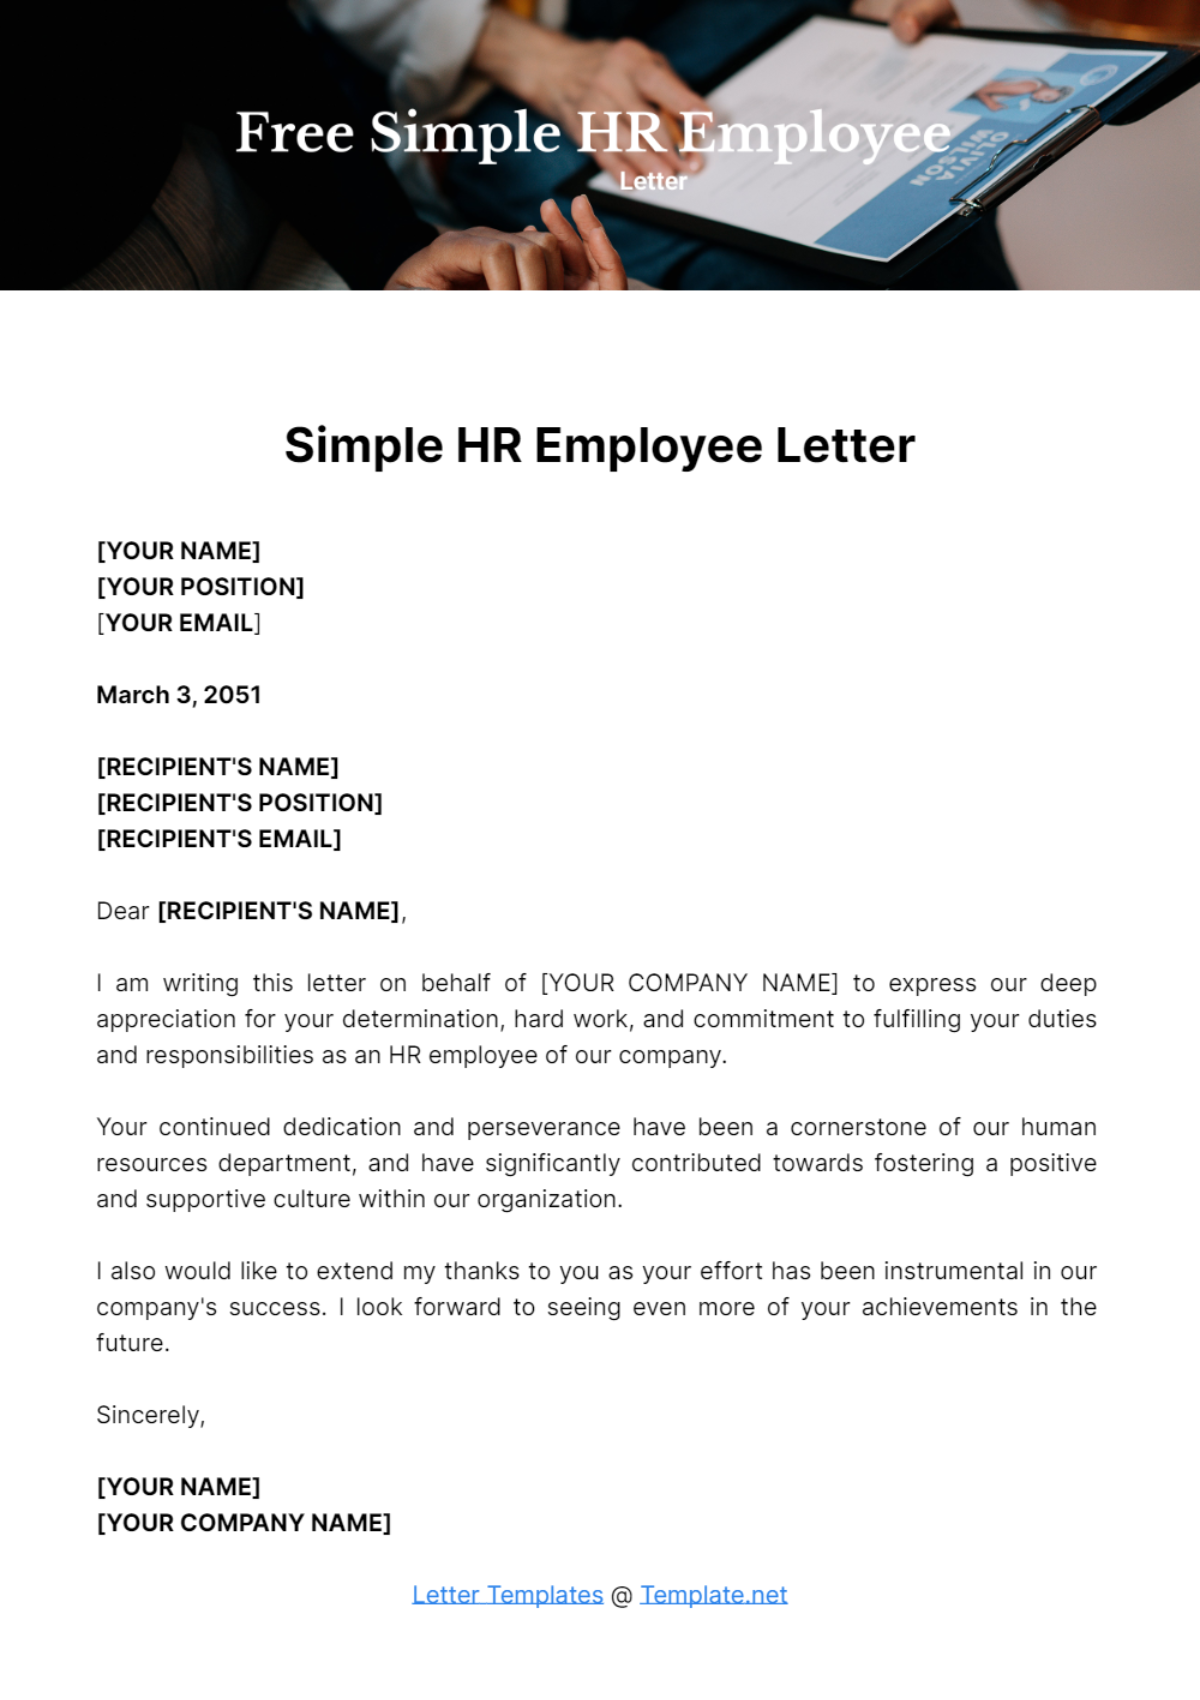 Free Simple HR Employee Letter Template